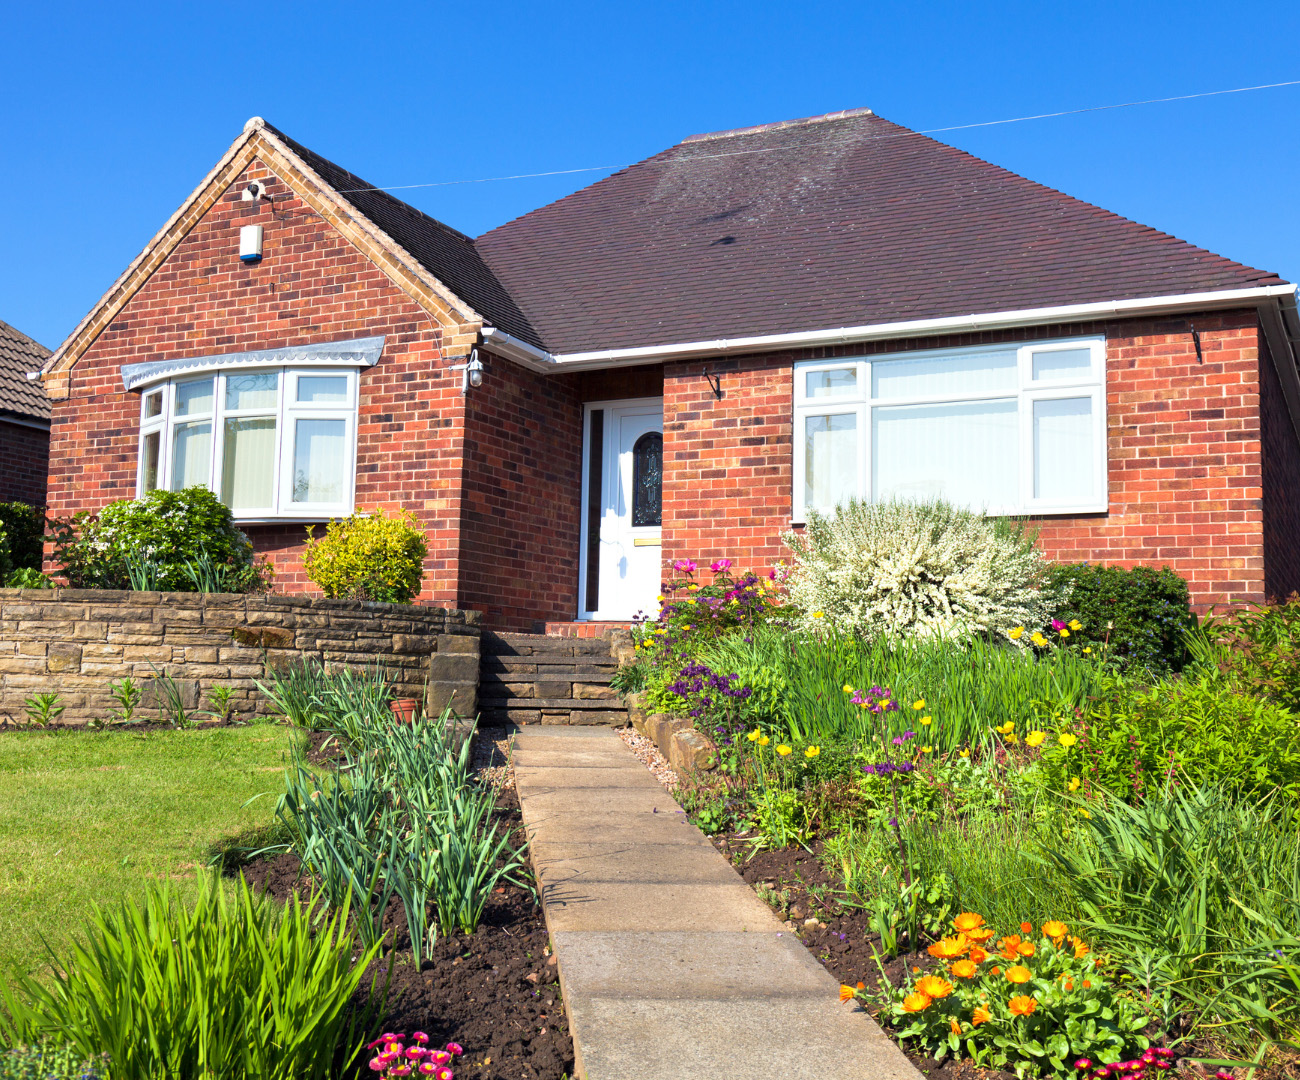 An image of a house with footpath and garden